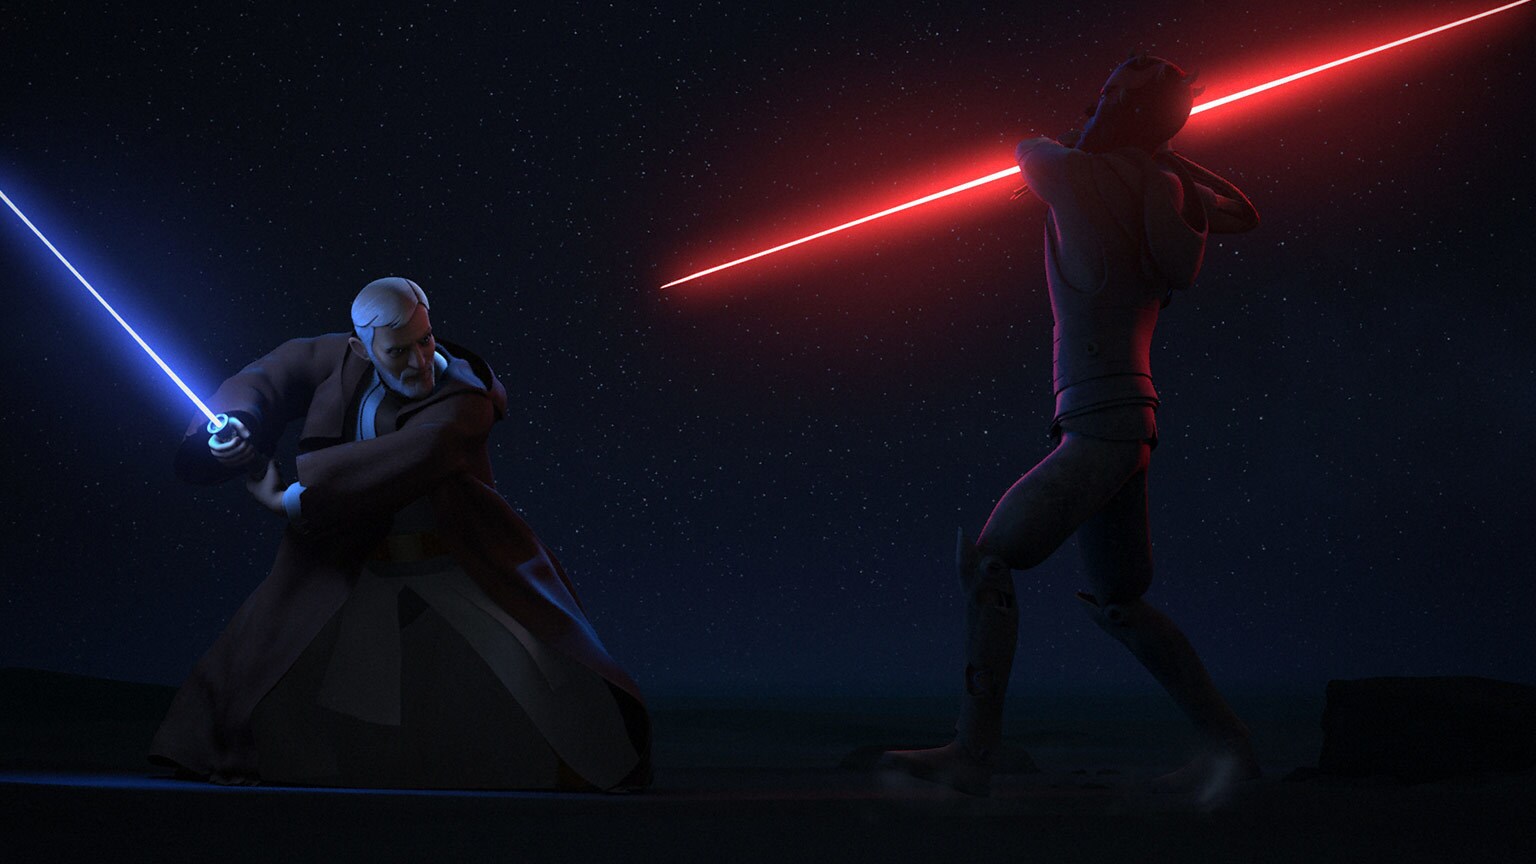 Dave Filoni on Obi-Wan Versus Maul and More from Star Wars Rebels Season Three